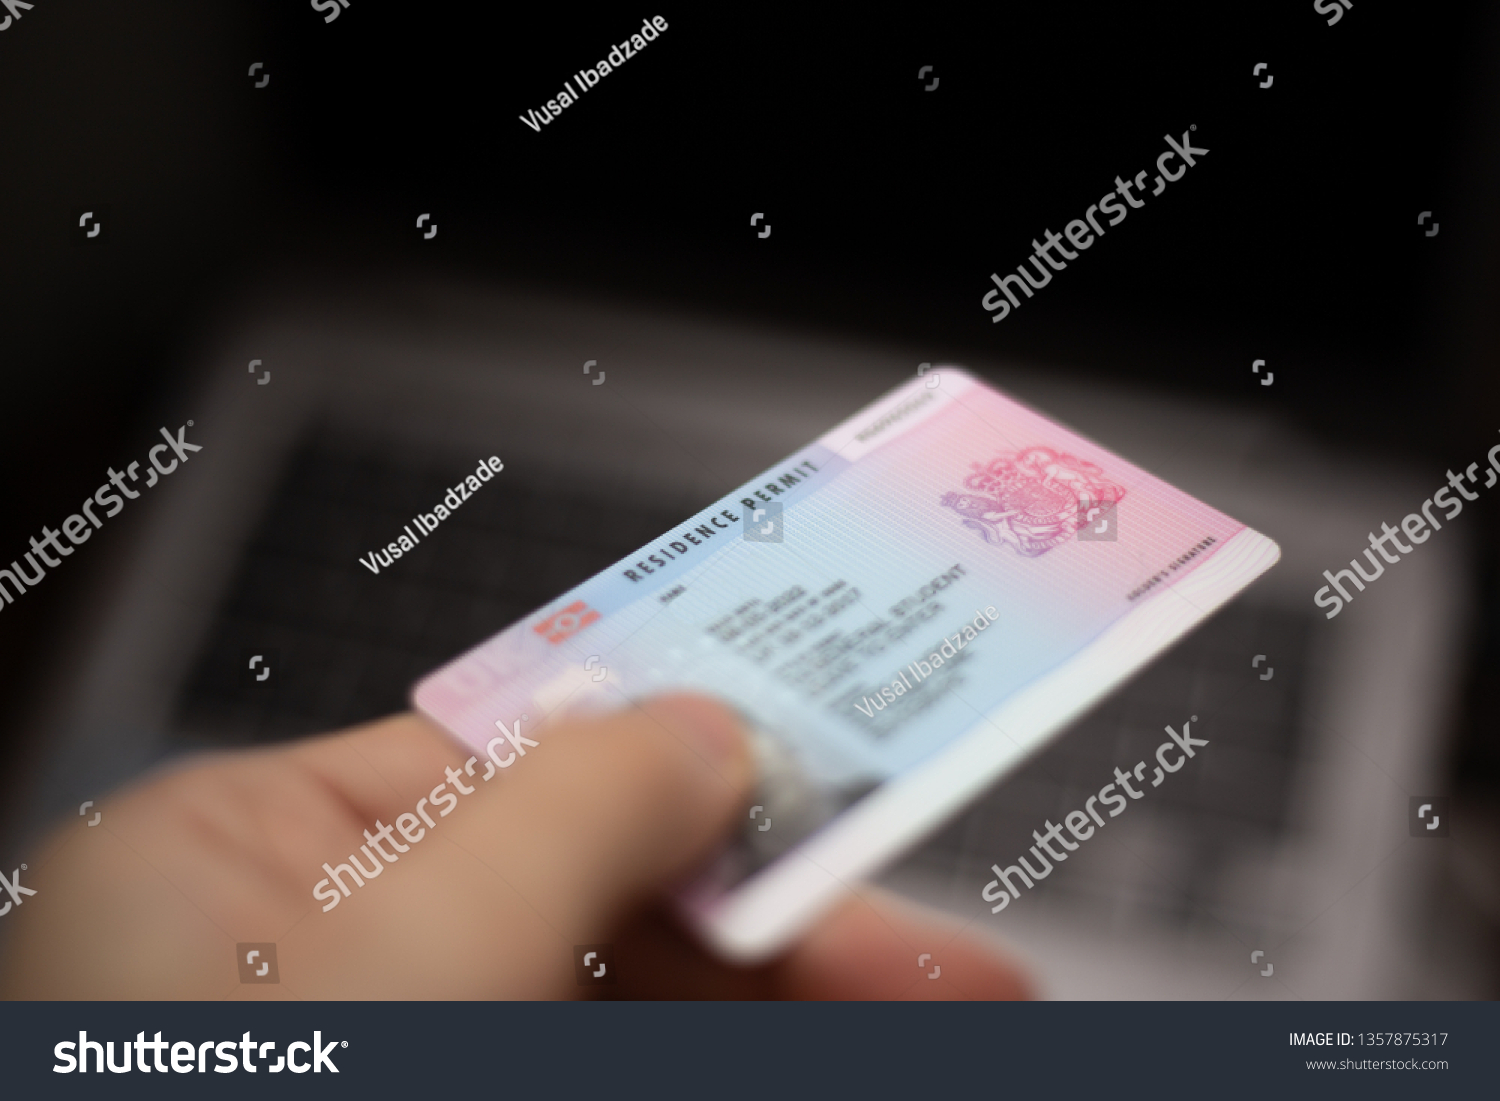 Person holds UK Residence Permit - BRP card in hand and computer in the background. Immigration concept image.  #1357875317